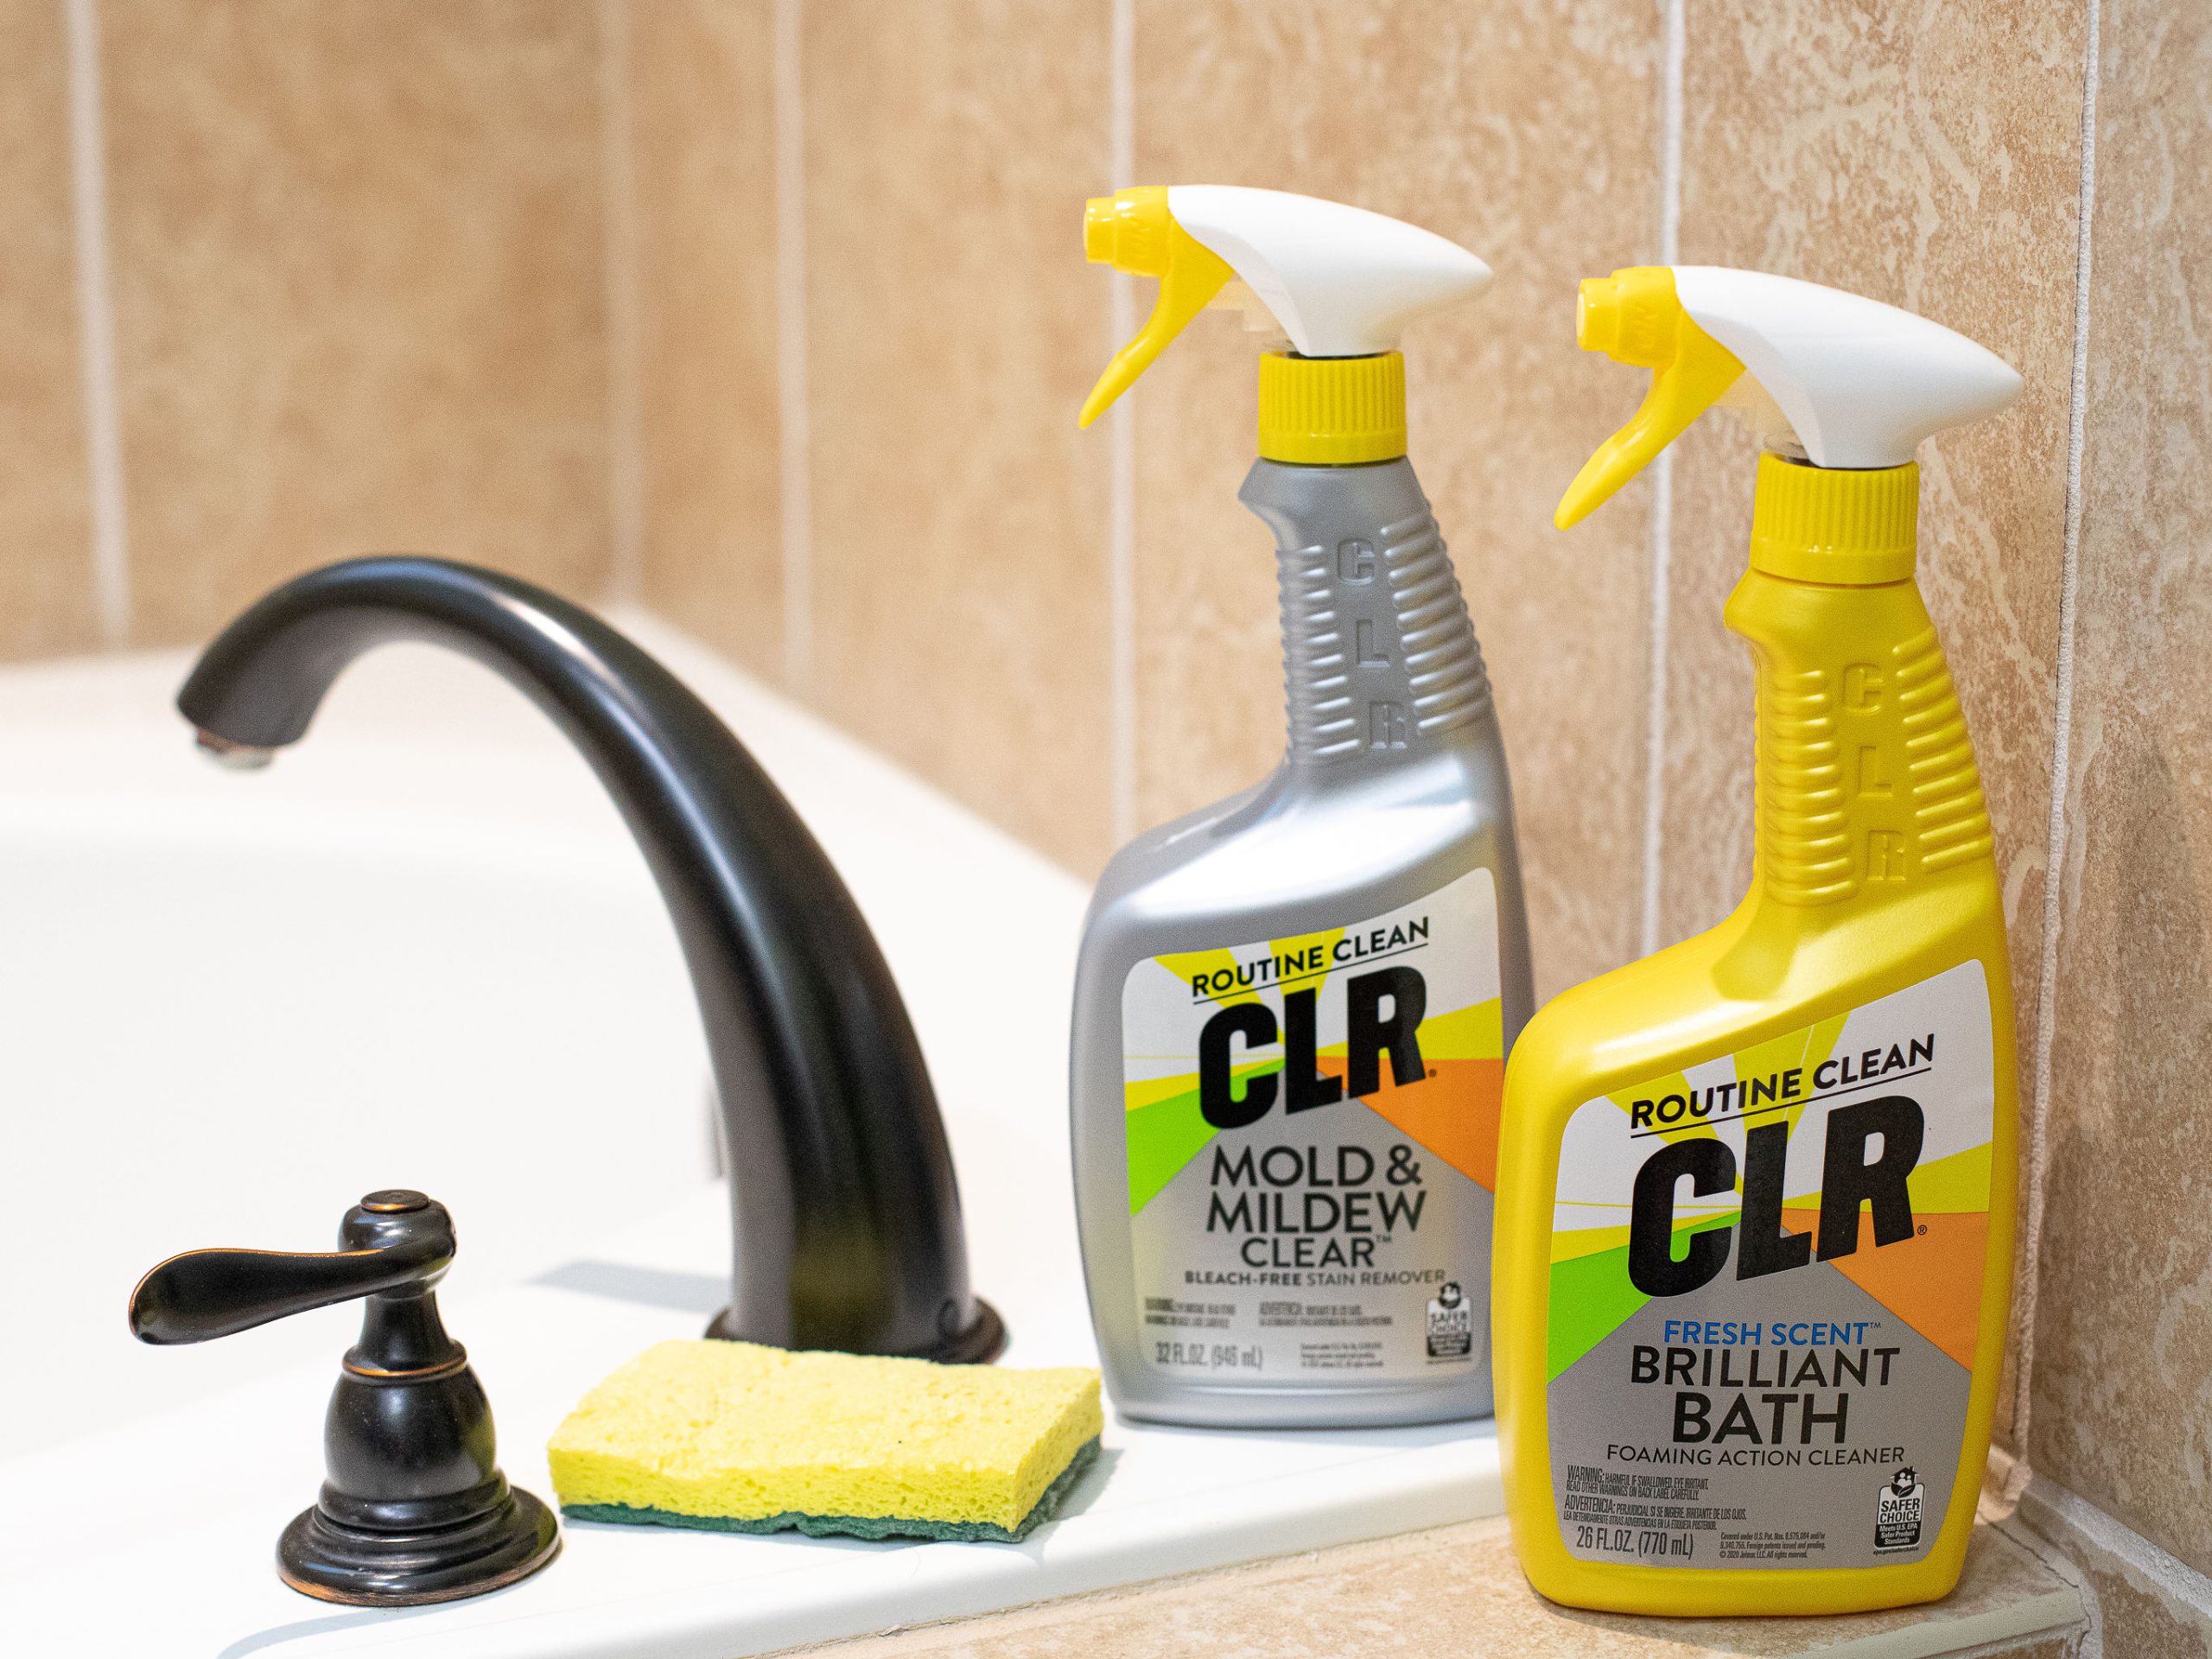 CLR Stain Remover Or Cleaner As Low As $1.35 At Publix